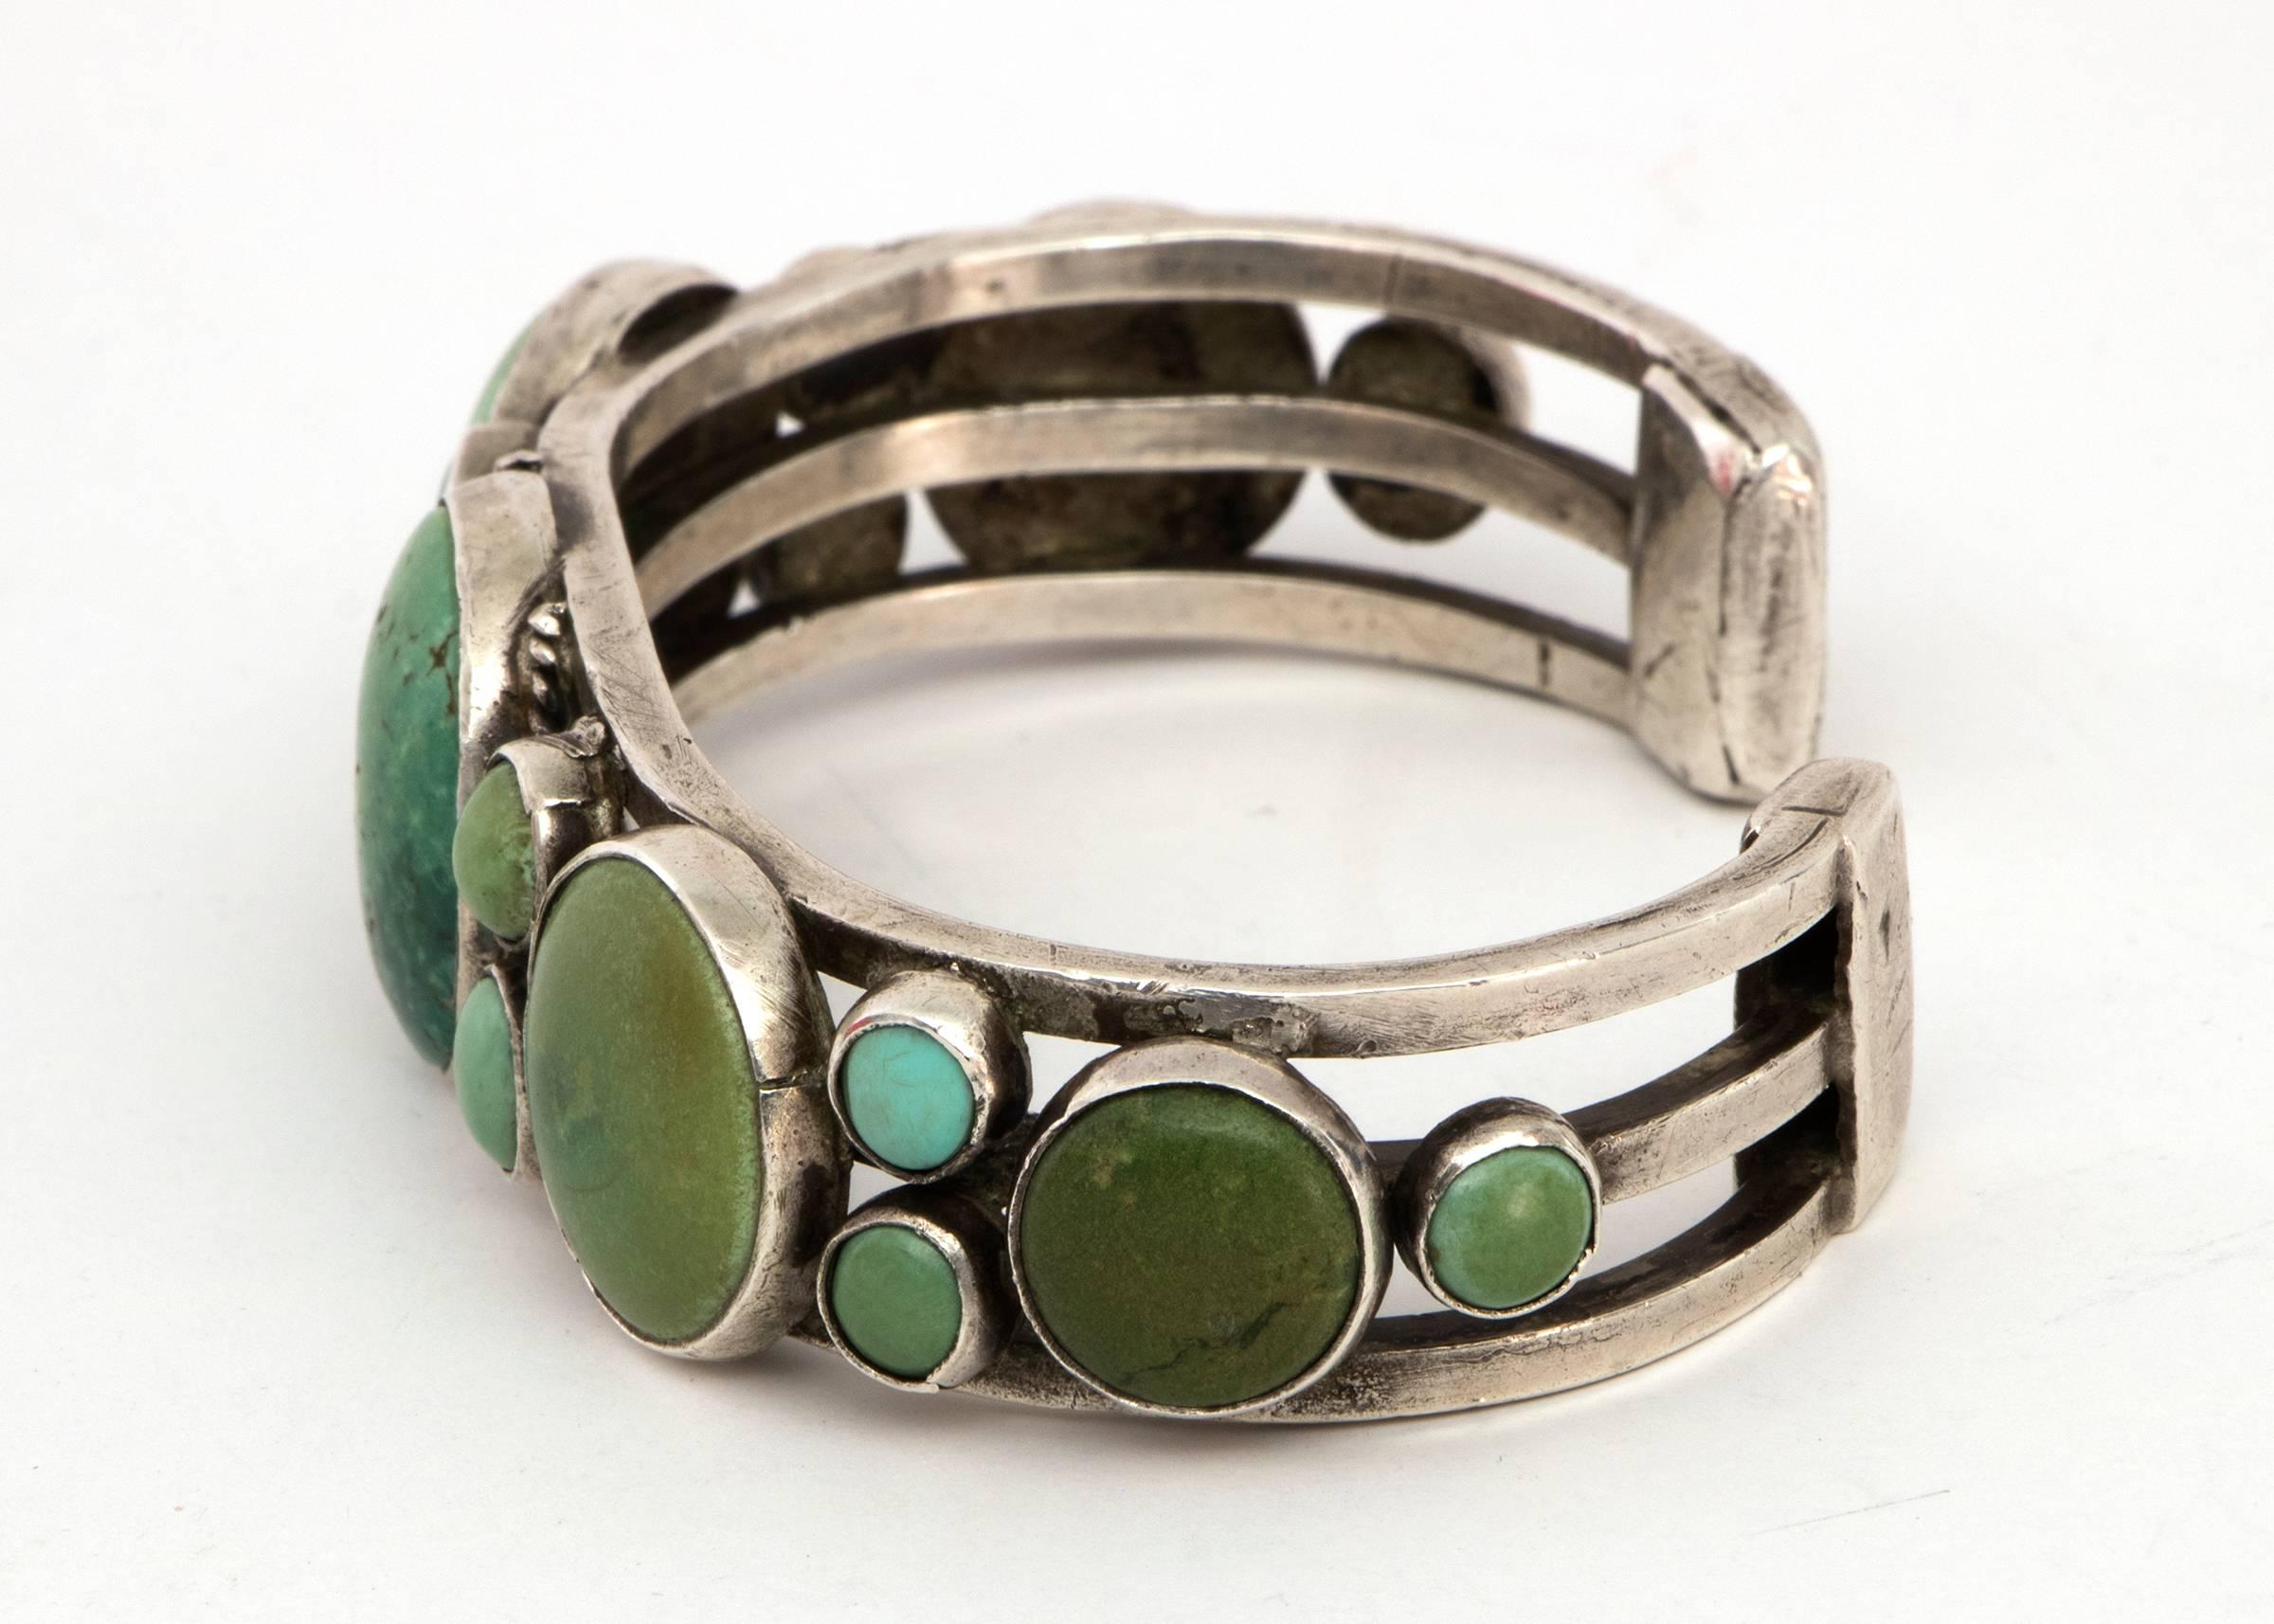 Vintage Navajo Old Pawn bracelet created with silver and large green Cerillos Turquoise, circa 1940.  The interior circumference of the bracelet measures 6 ⅝ (5 ½